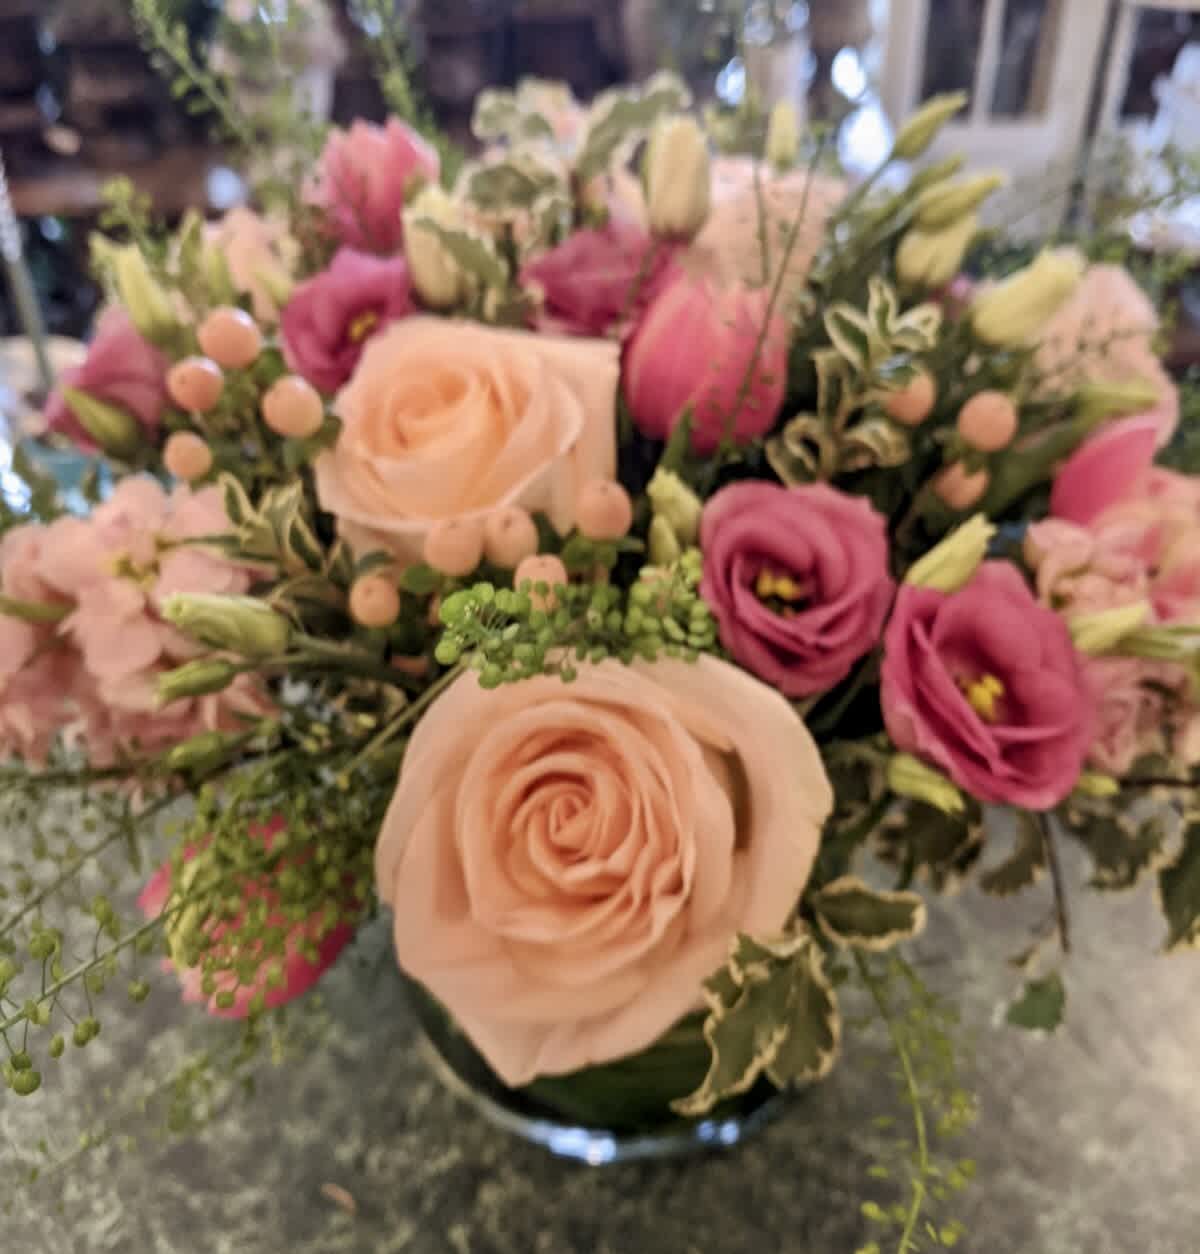 Peachy Pink 6x6 Cylinder Vase - Lovely mix of peach and pink flowers include Peach roses, stock, hypericum berries, Columbus tulips and Lisianthus. Perfect for any occasion.